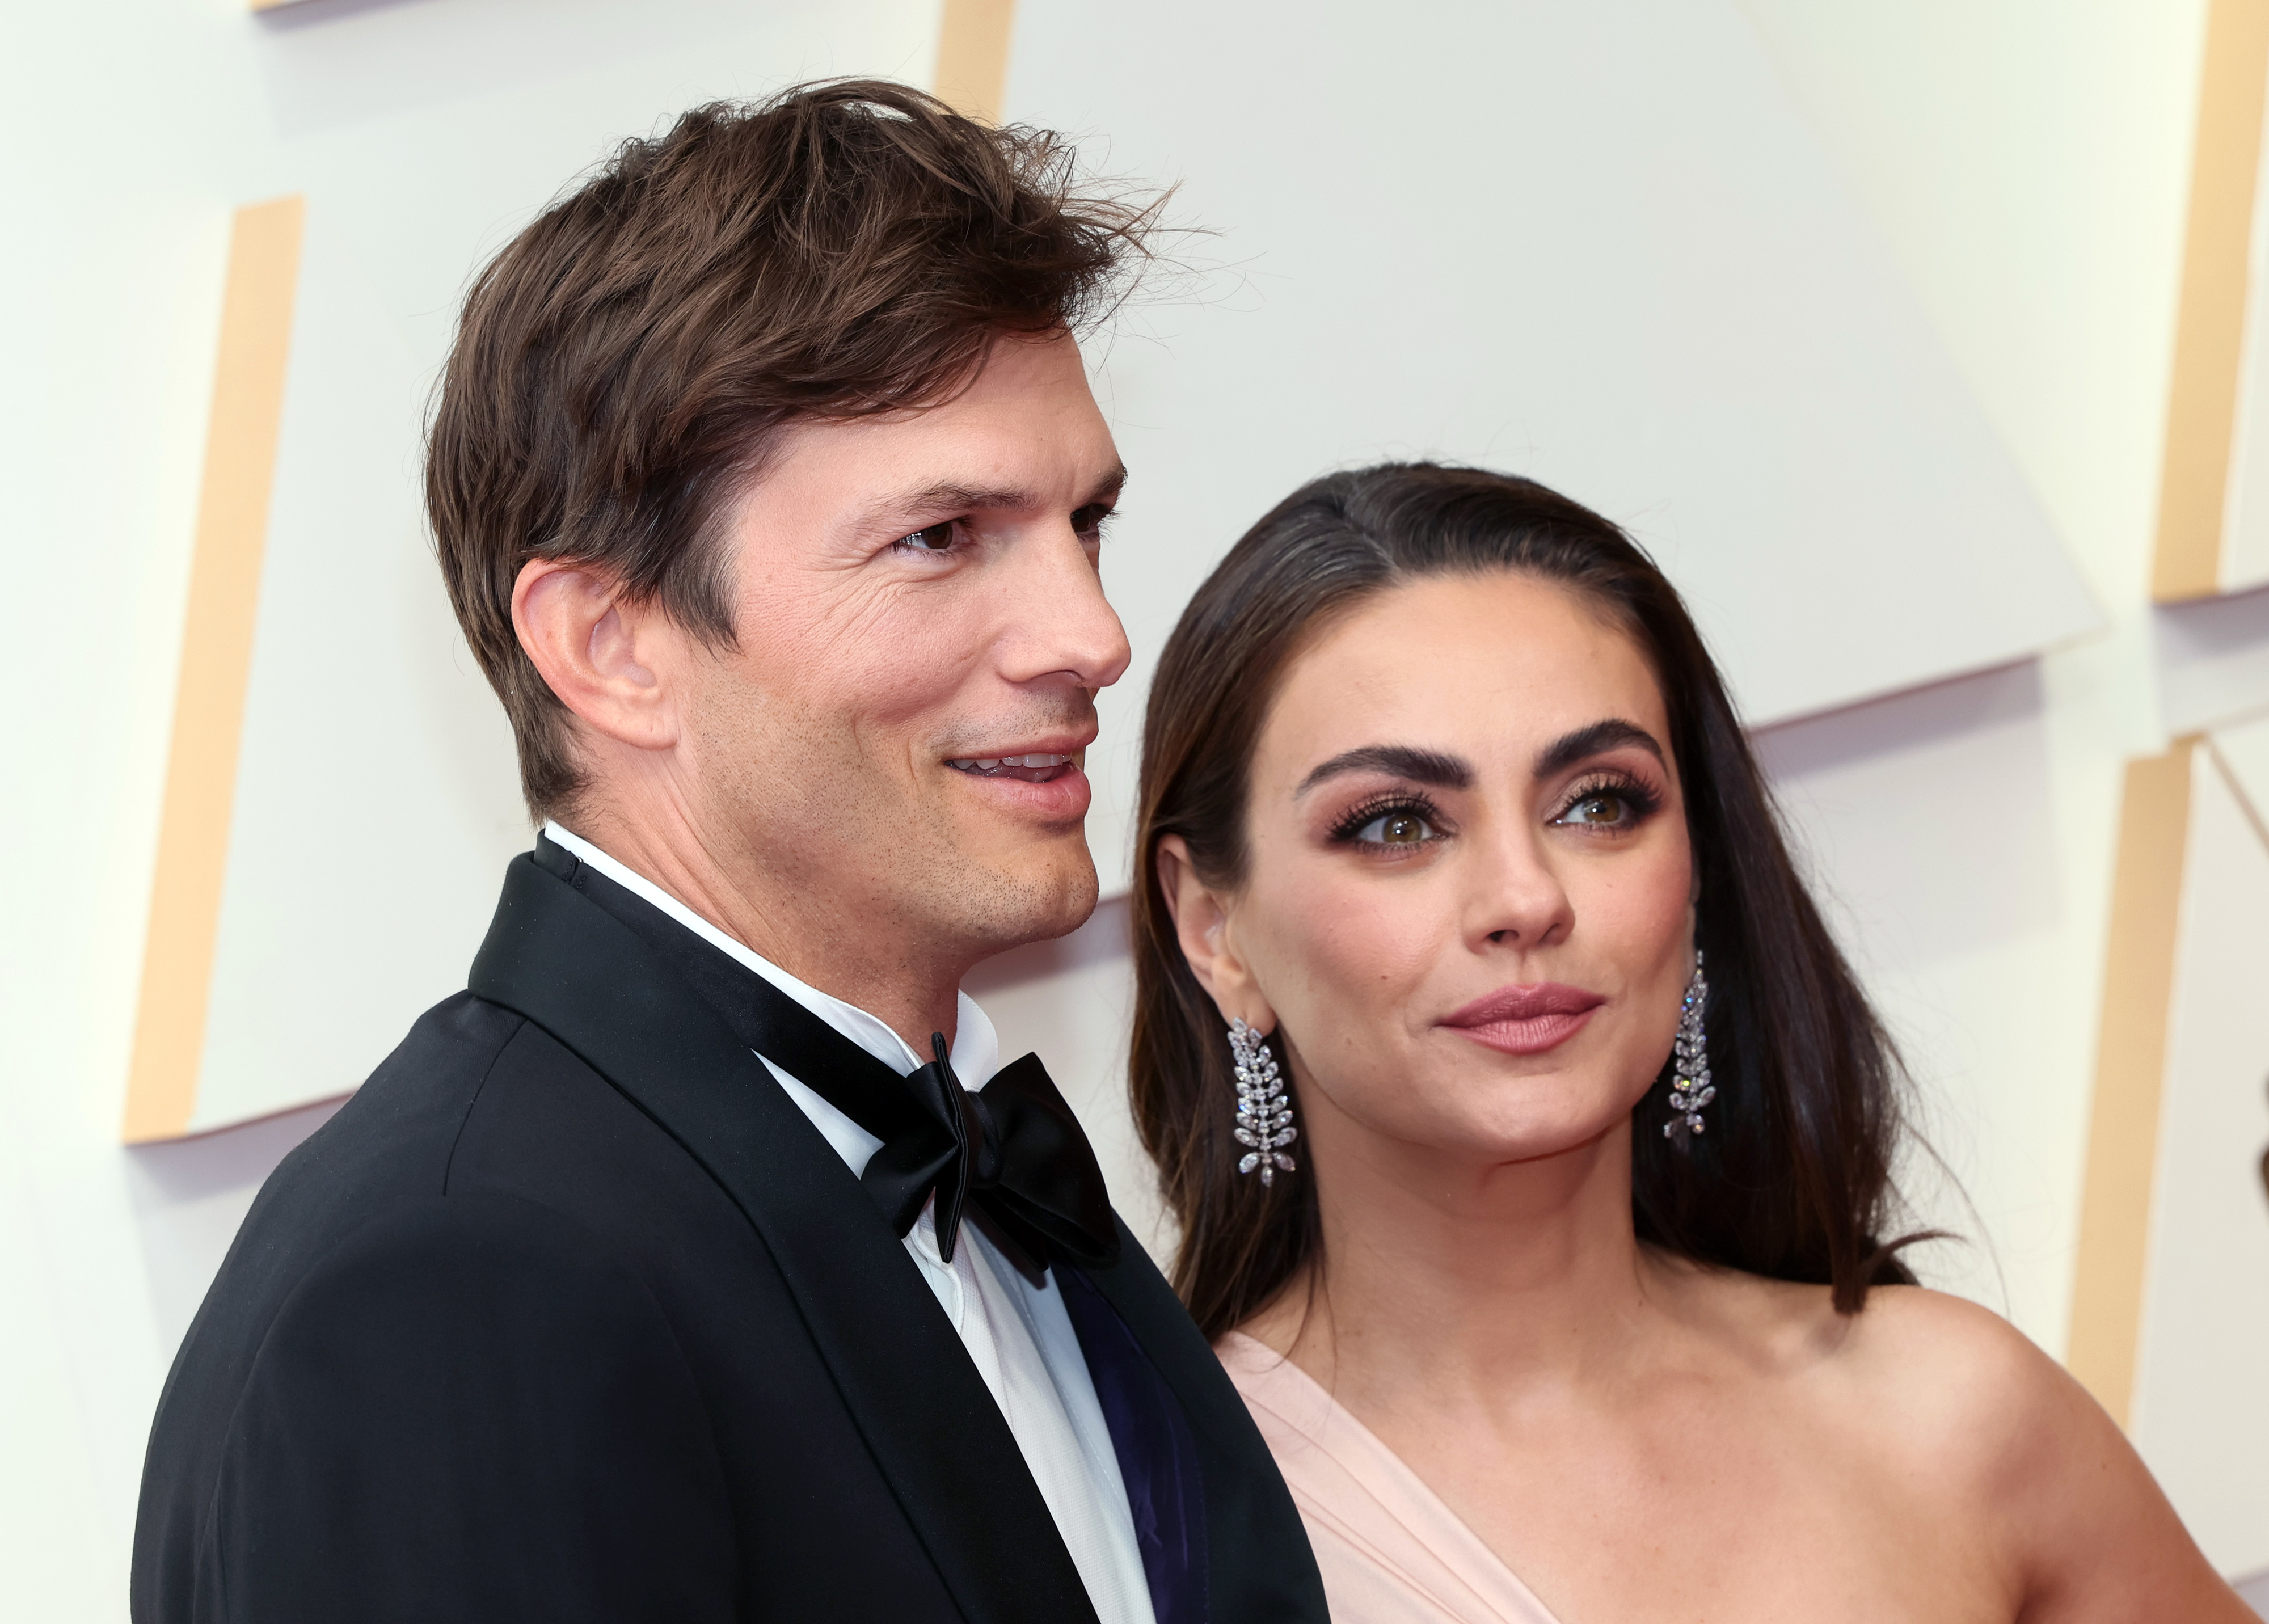 Ashton Kutcher and Mila Kunis in formal attire at an event